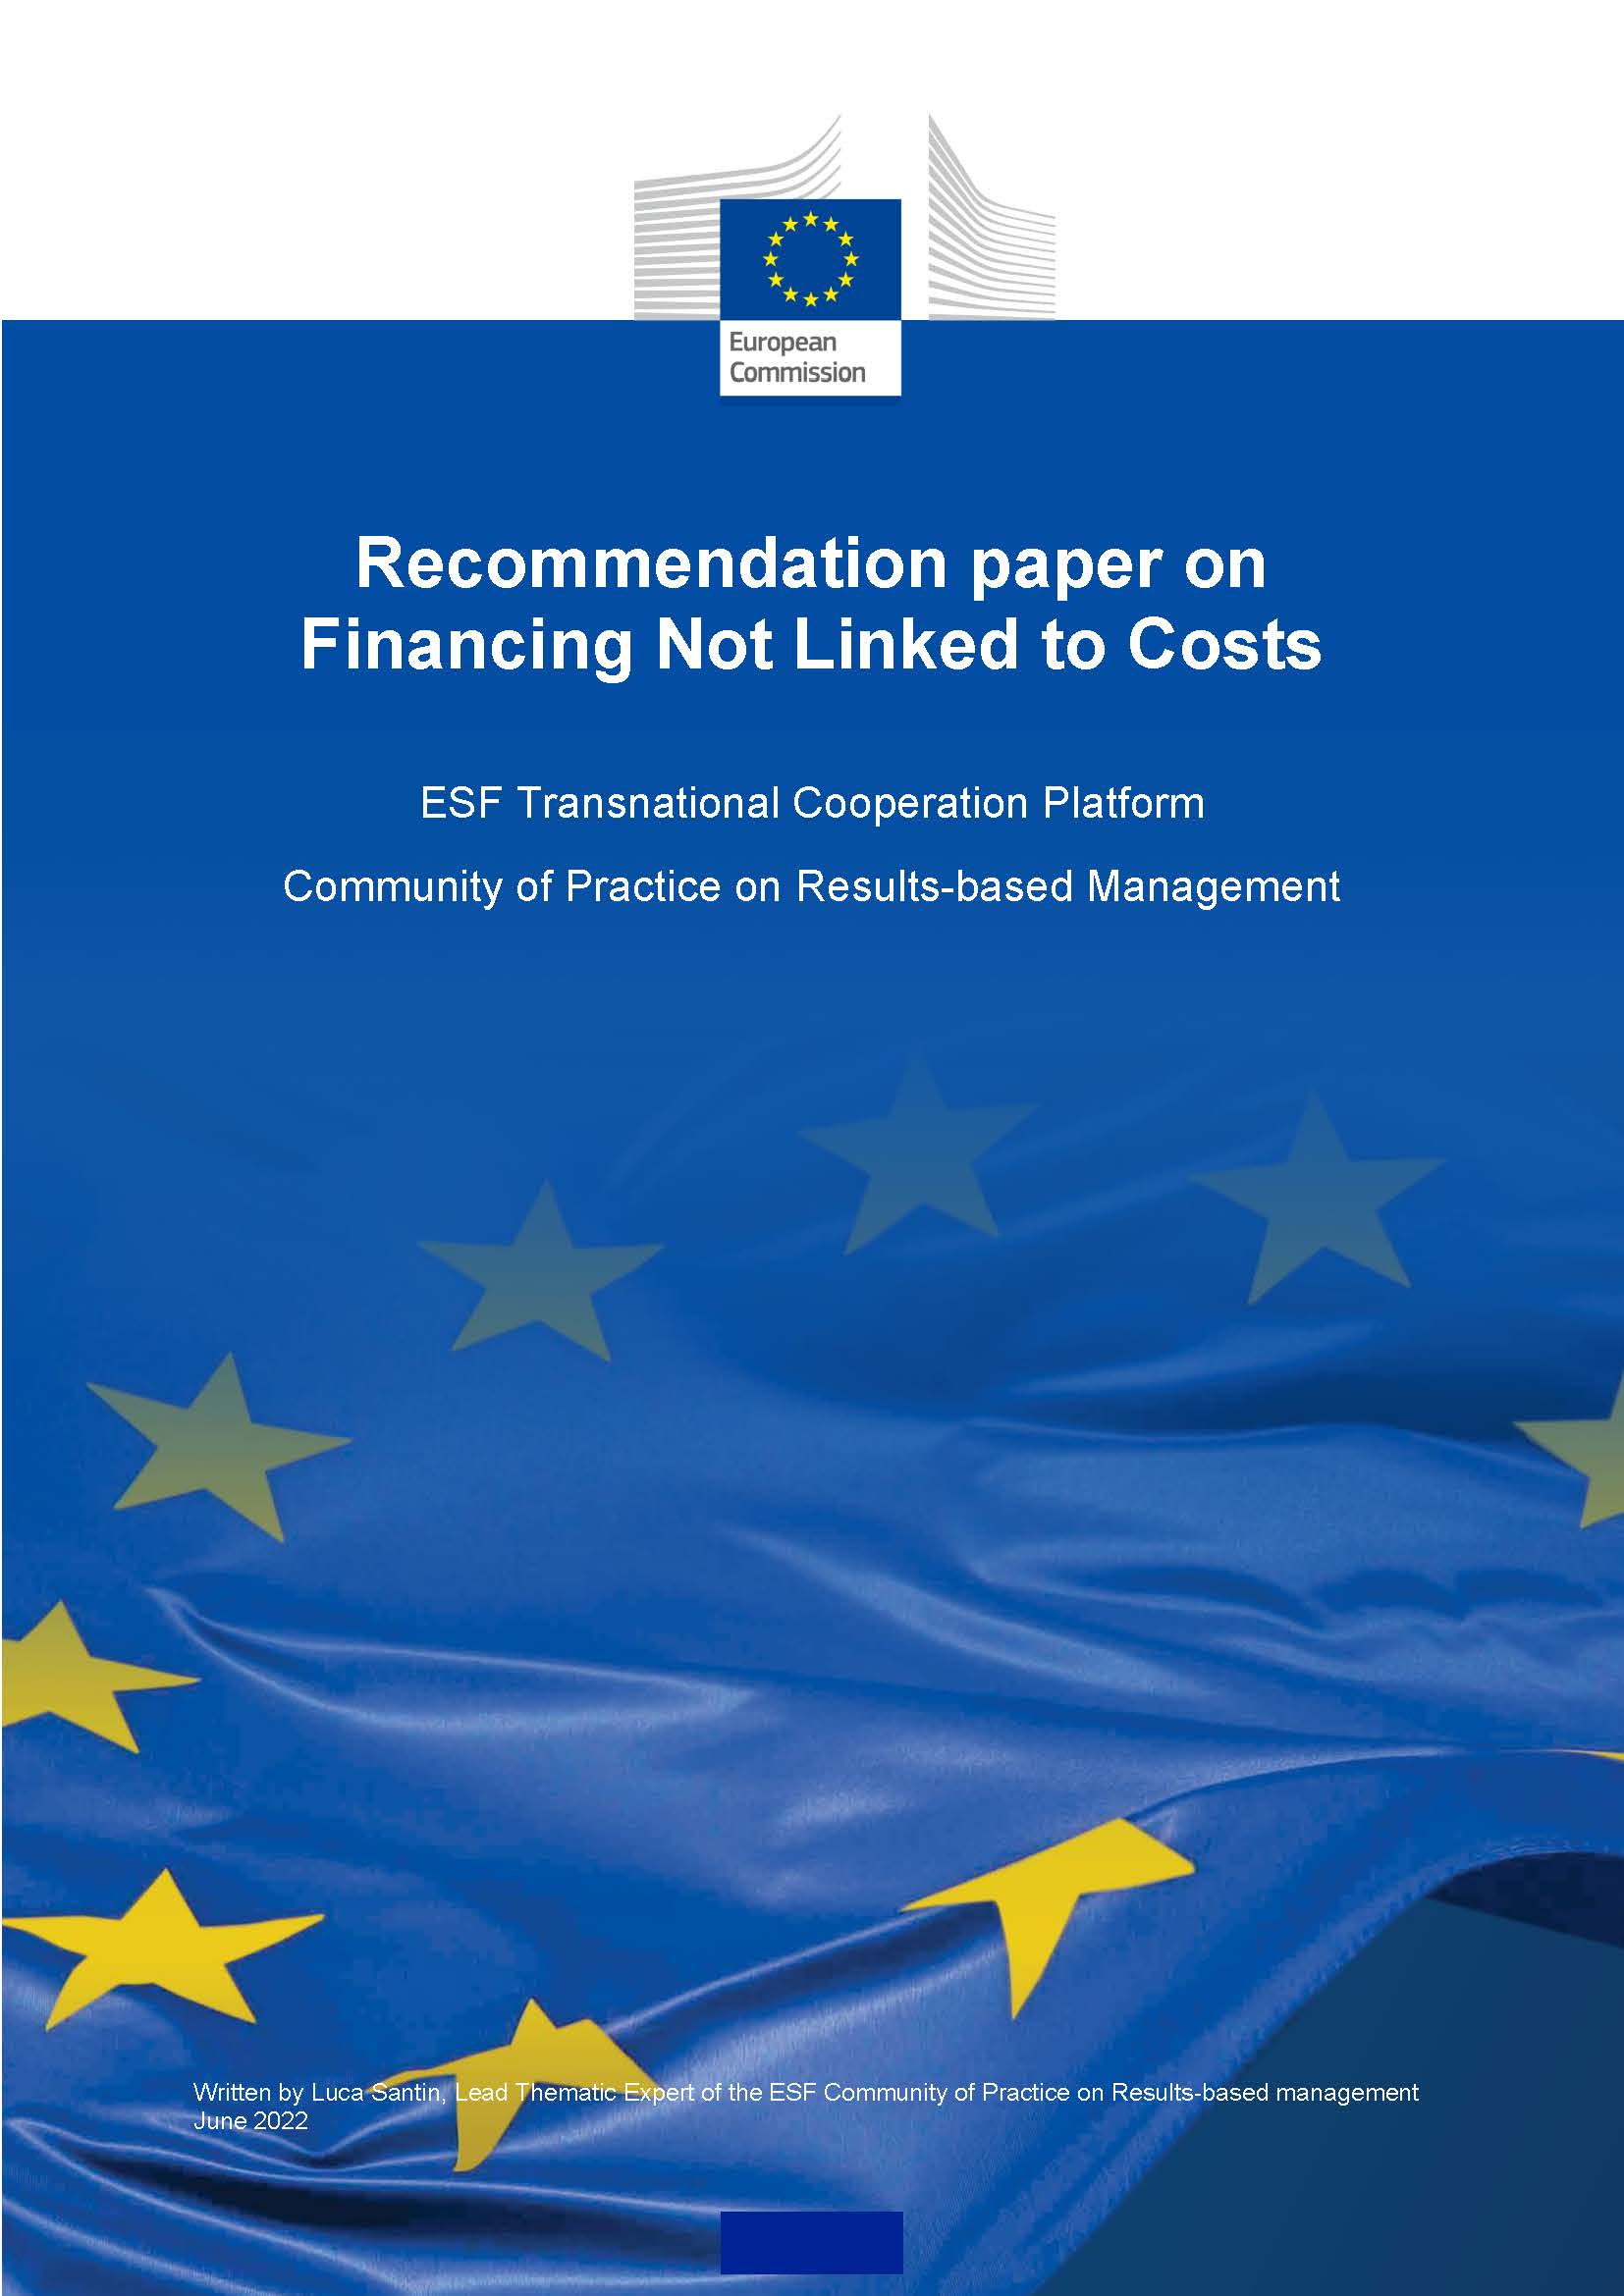 Recommendation paper on Financing Not Linked to Costs